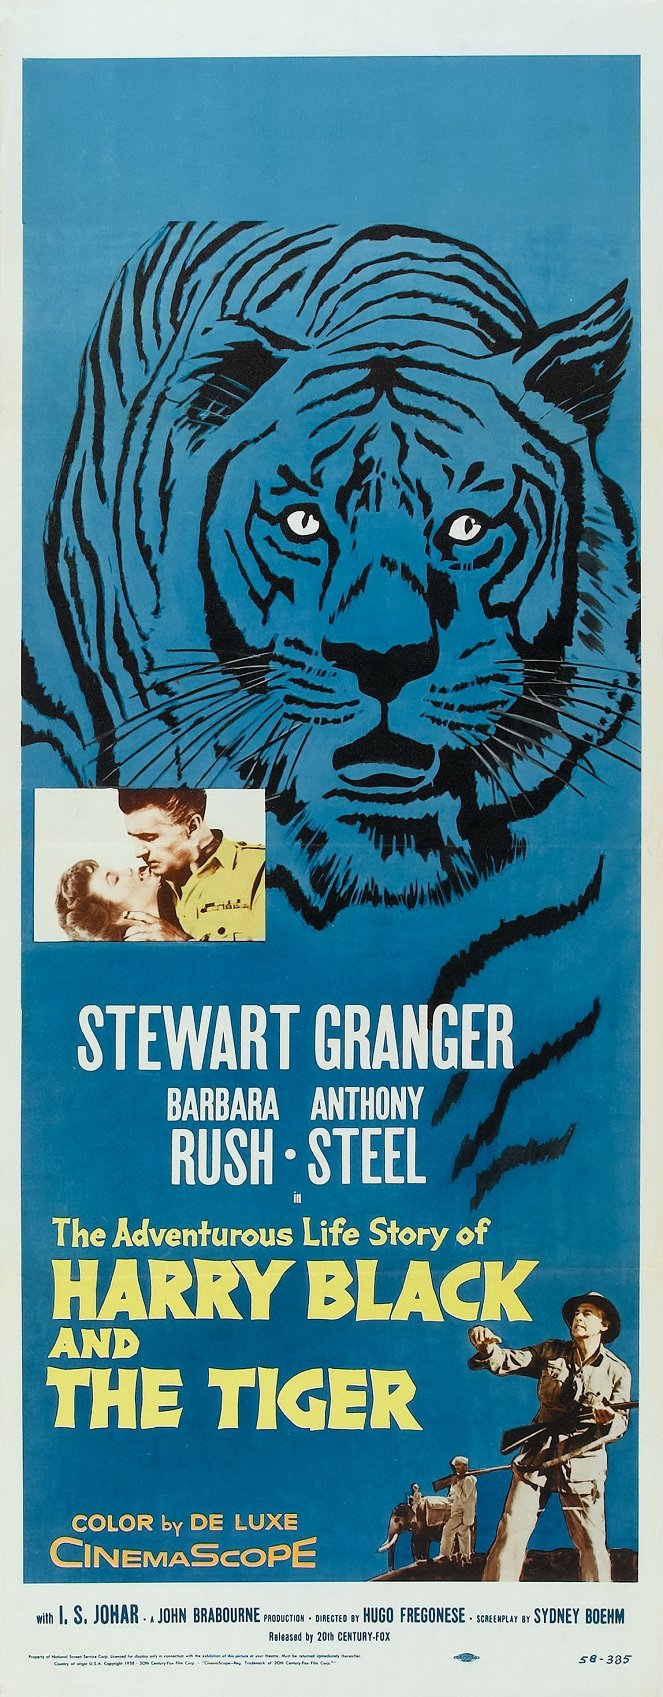 Harry Black and the Tiger - Posters